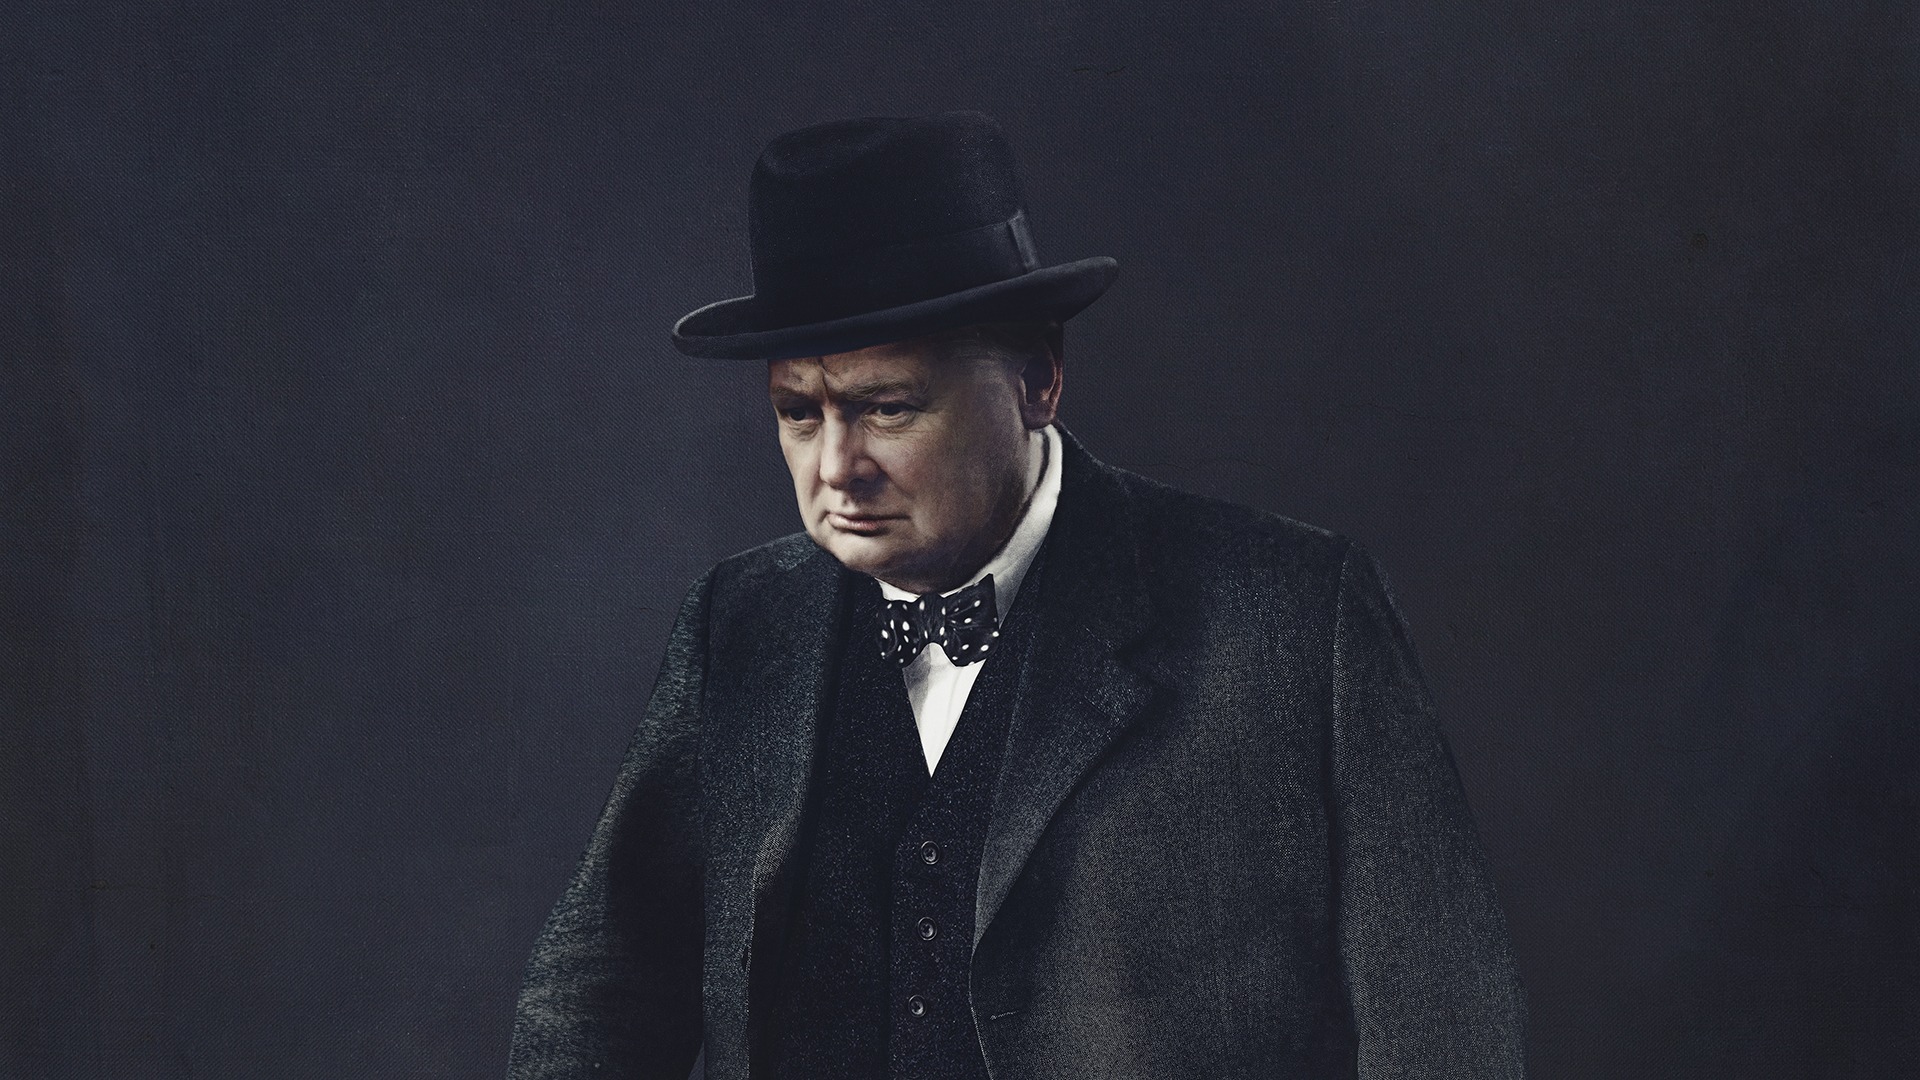 Churchill 101: Three Reasons to Learn About Winston Churchill